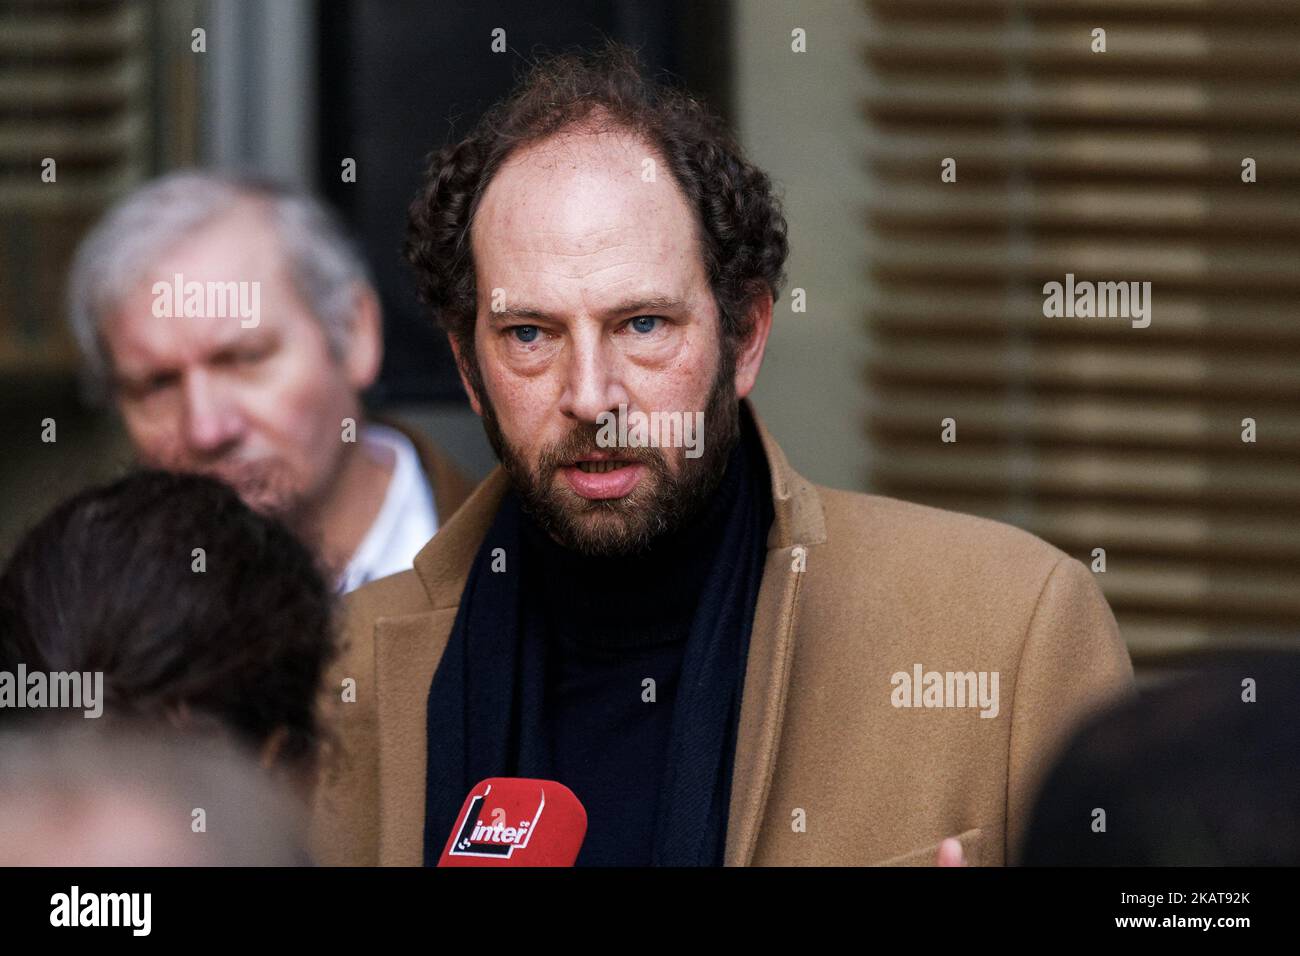 French writer Olivier Guez addresses the press at the restaurant Drouant in Paris, France on November 6, 2017. Olivier Guez wins the Renaudot prize for his novel ‘La Disparition de Josef Mengele’, or ‘The Disappearance of Josef Mengele’. The Renaudot prize while not officially related to the Prix Goncourt, is a kind of complement to it, announcing its laureate at the same time and place as the Prix Goncourt, namely on the first Tuesday of November at the Drouant restaurant in Paris. (Photo by Michel Stoupak/NurPhoto) Stock Photo